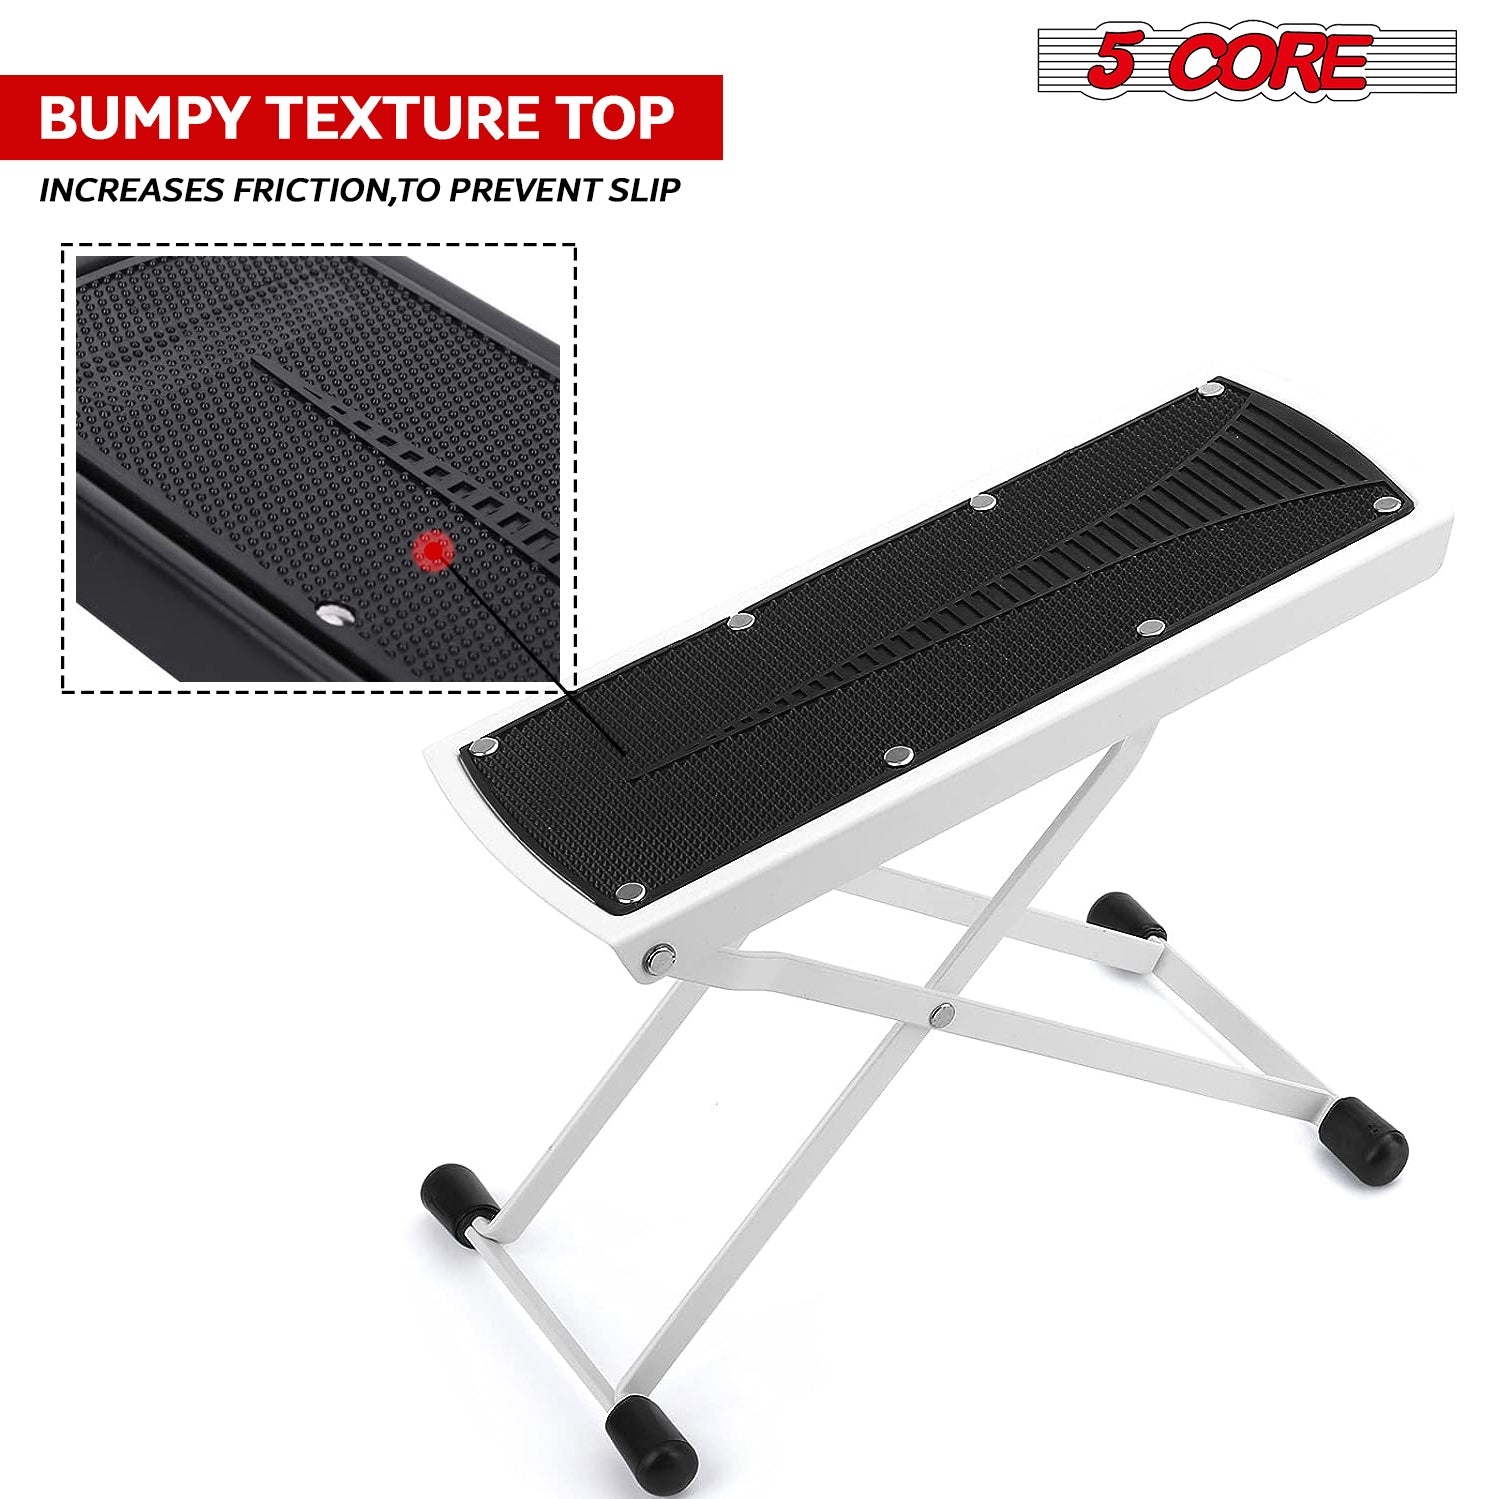 Bumpy texture top increases friction, to prevent slip